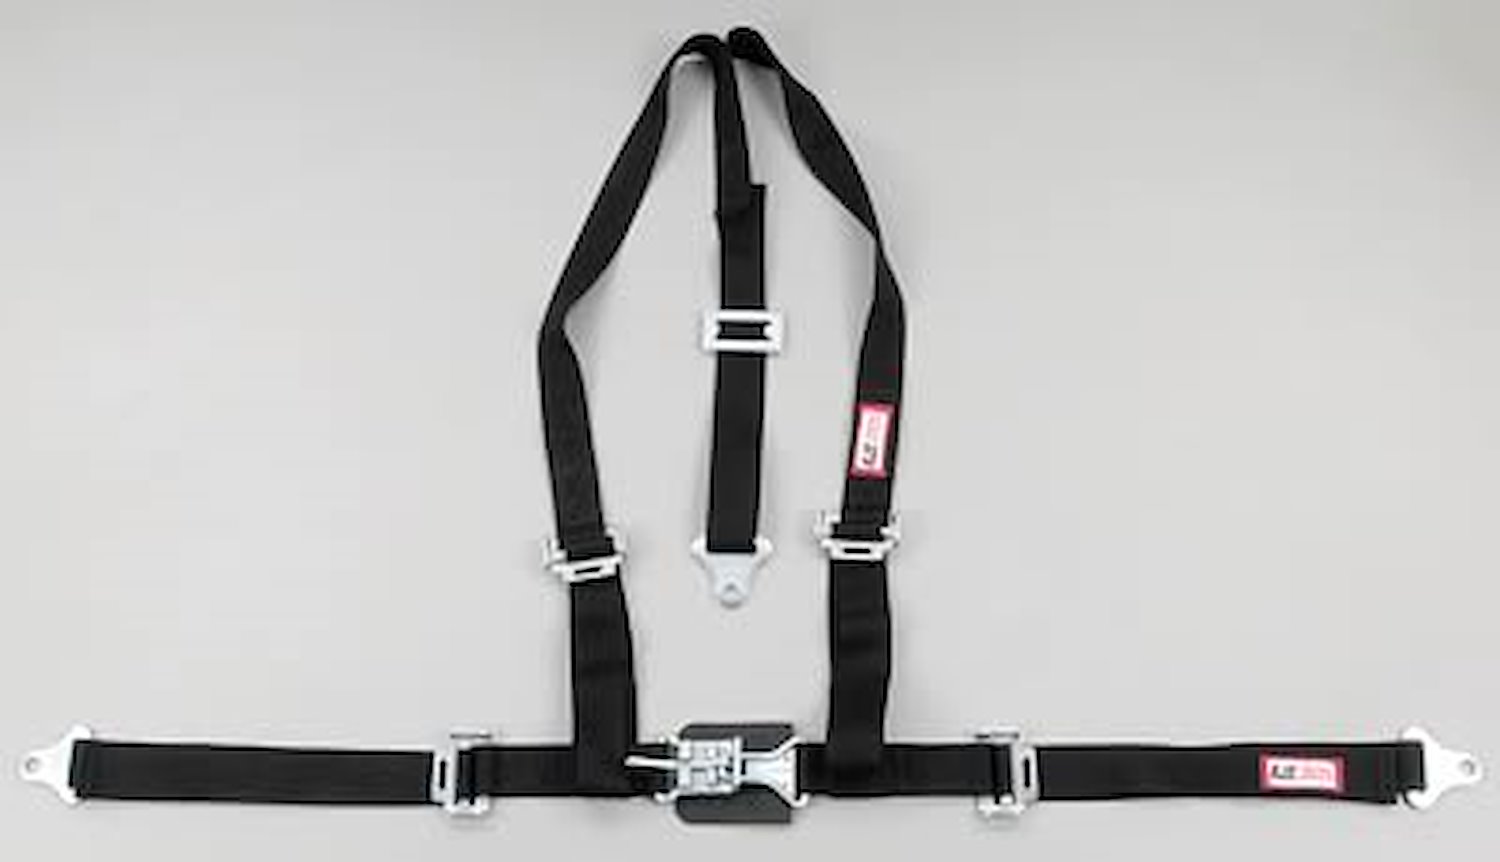 NON-SFI L&L HARNESS 3 PULL DOWN Lap Belt SEWN IN 2 S.H. Individual ROLL BAR Mount w/STERNUM STRAP ALL WRAP ENDS BLACK